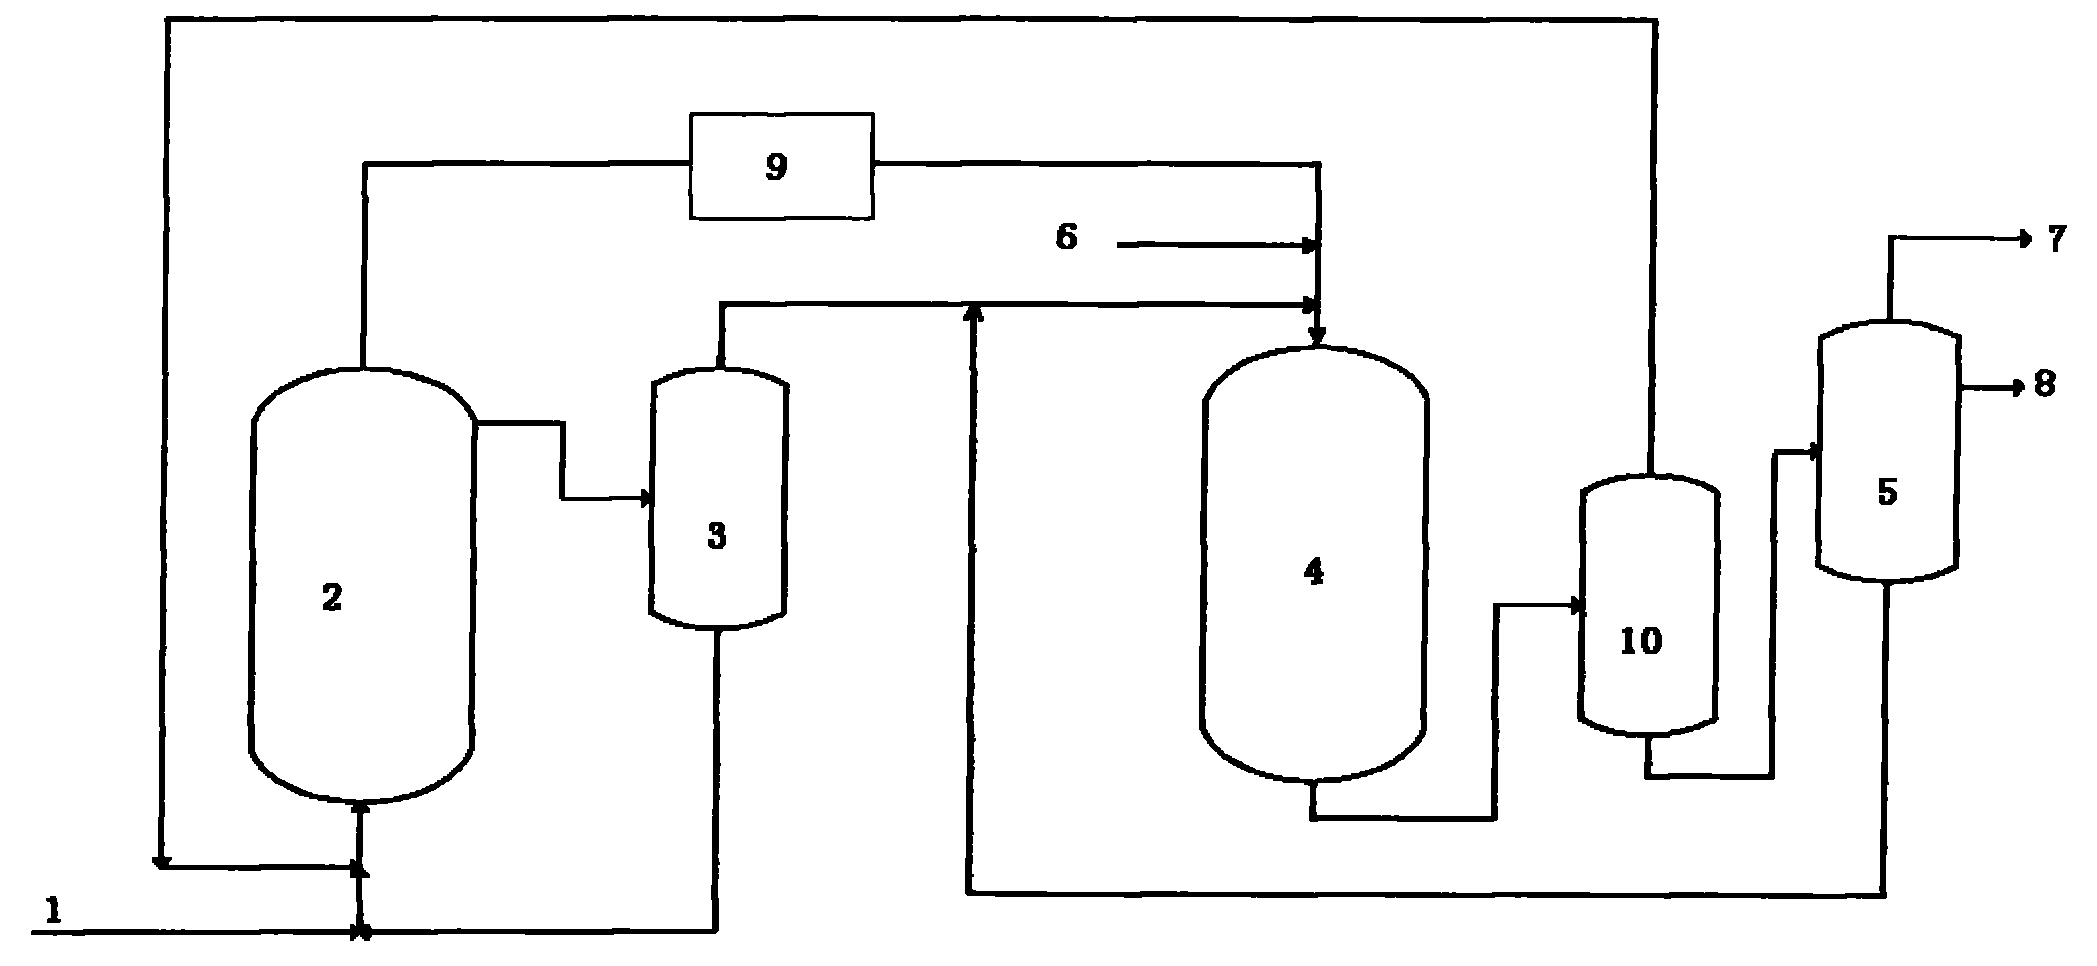 Heavy hydrocarbon hydrogenation combined process